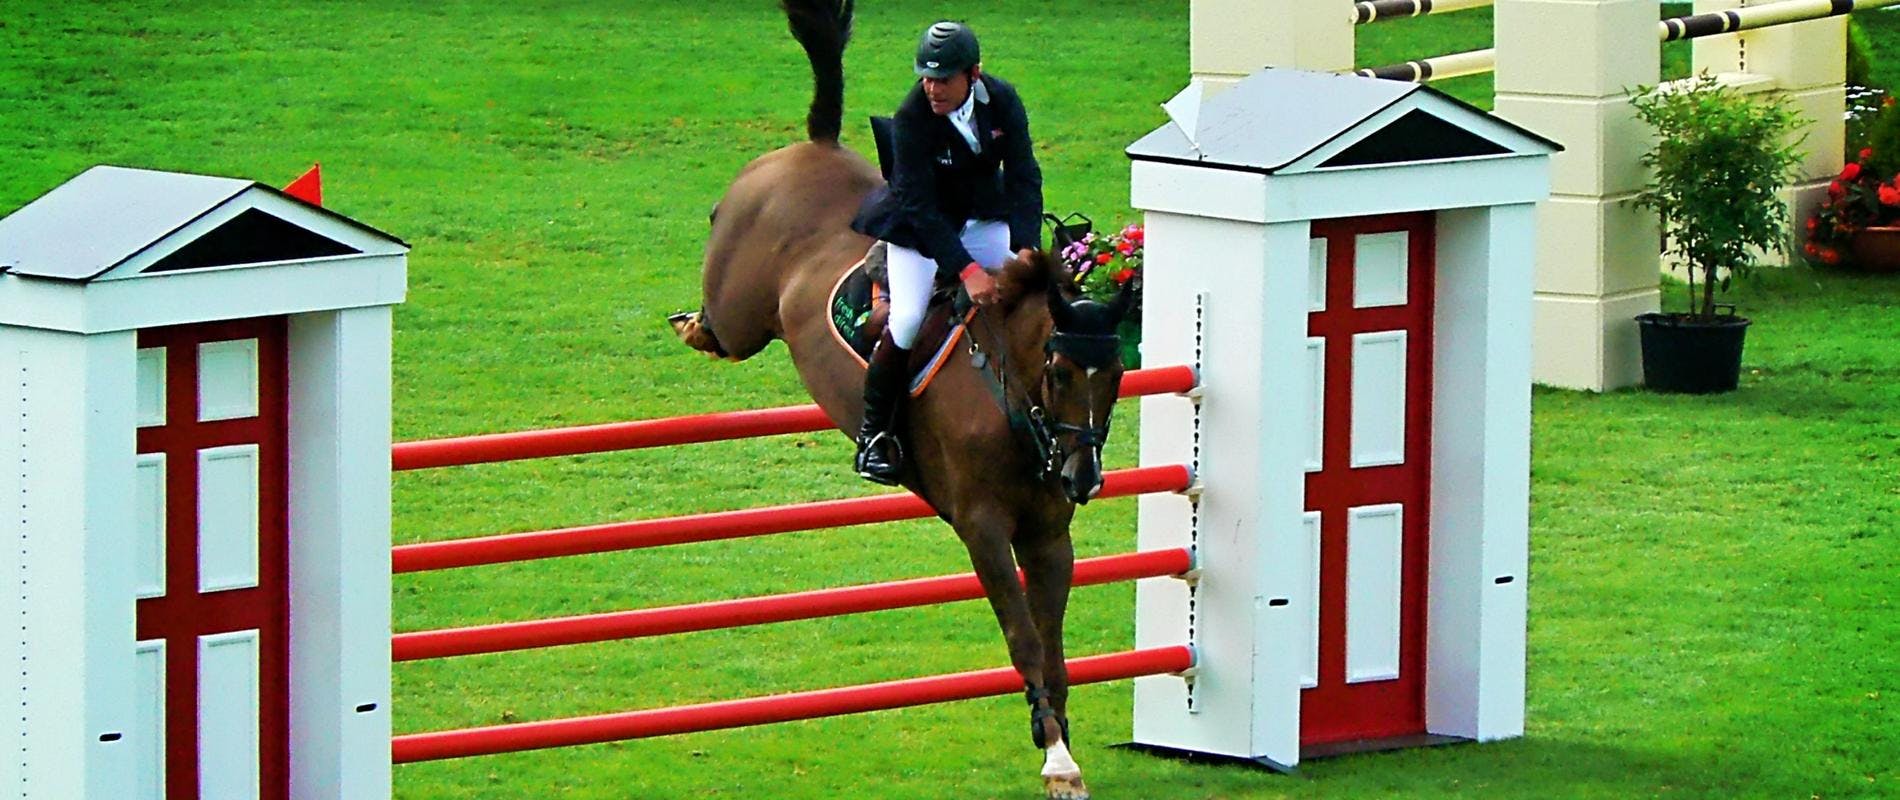 horse jumping over a jump on a turf field